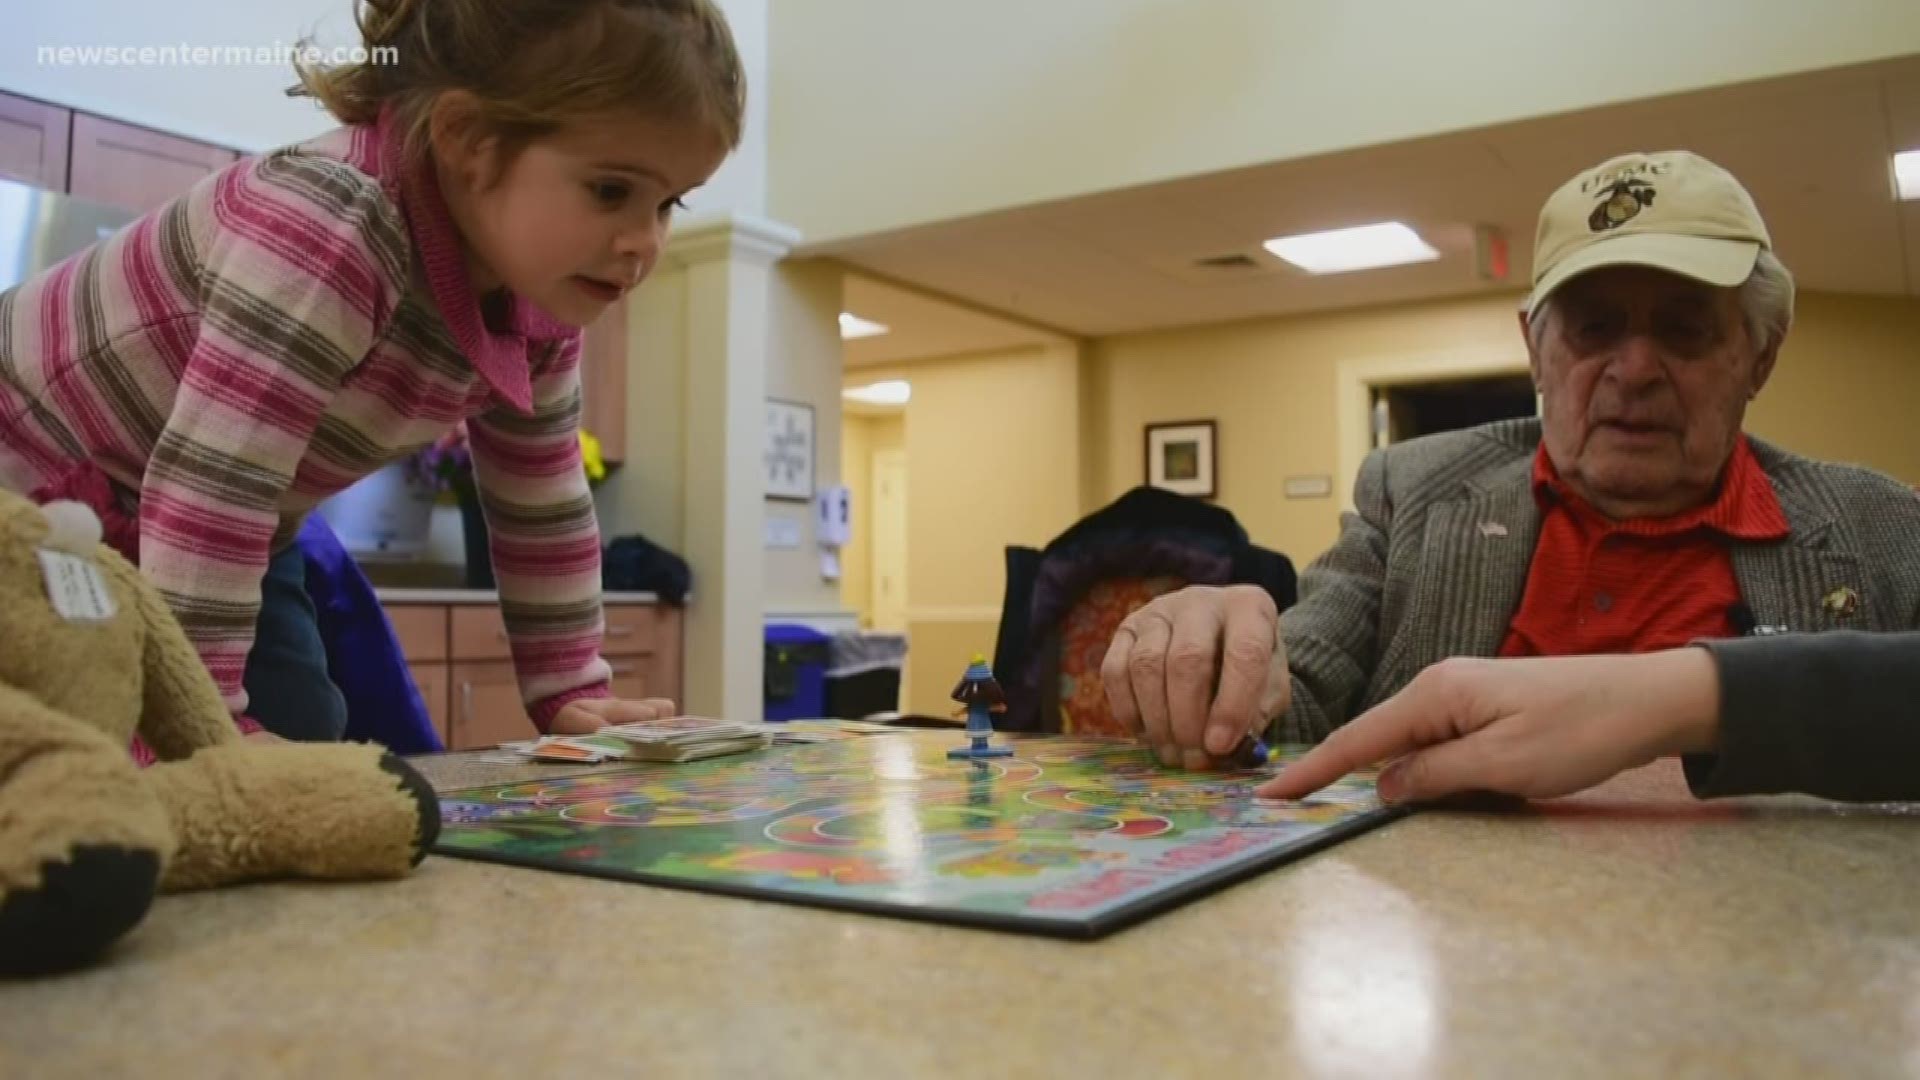 Valentine's Day can be a reminder that you are never too old... OR too young TO FIND love... in whatever form it takes.  NEWS CENTER's Beth McEvoy tells us about an unlikely friendship at an assisted living facility in southern Maine.